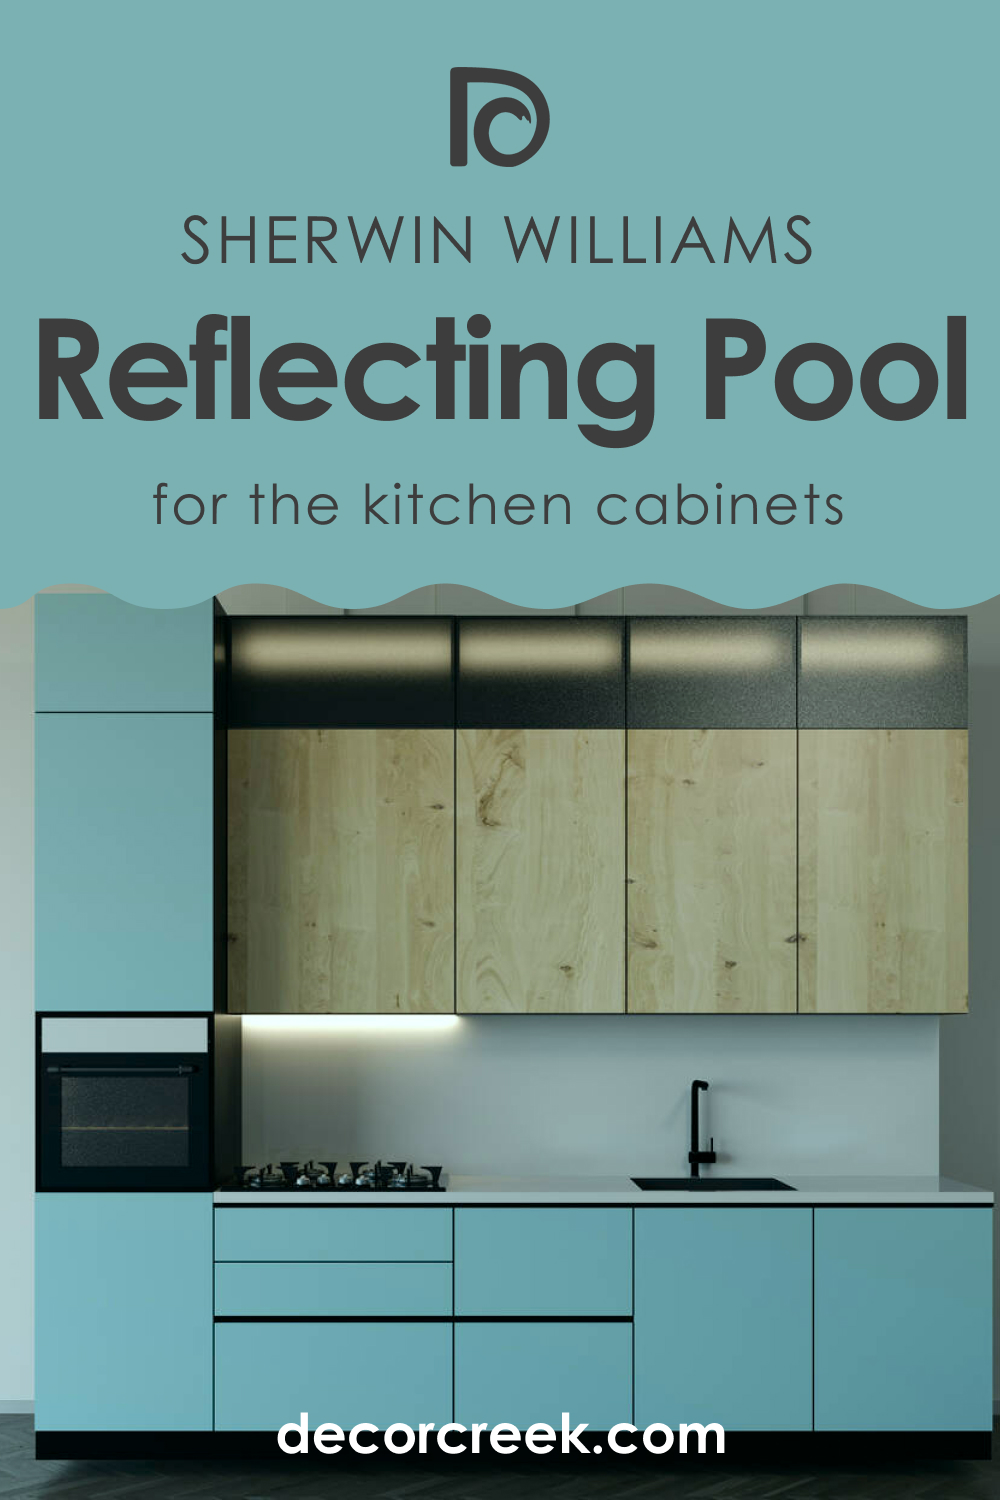 How to Use SW 6486 Reflecting Pool for the Kitchen Cabinets?